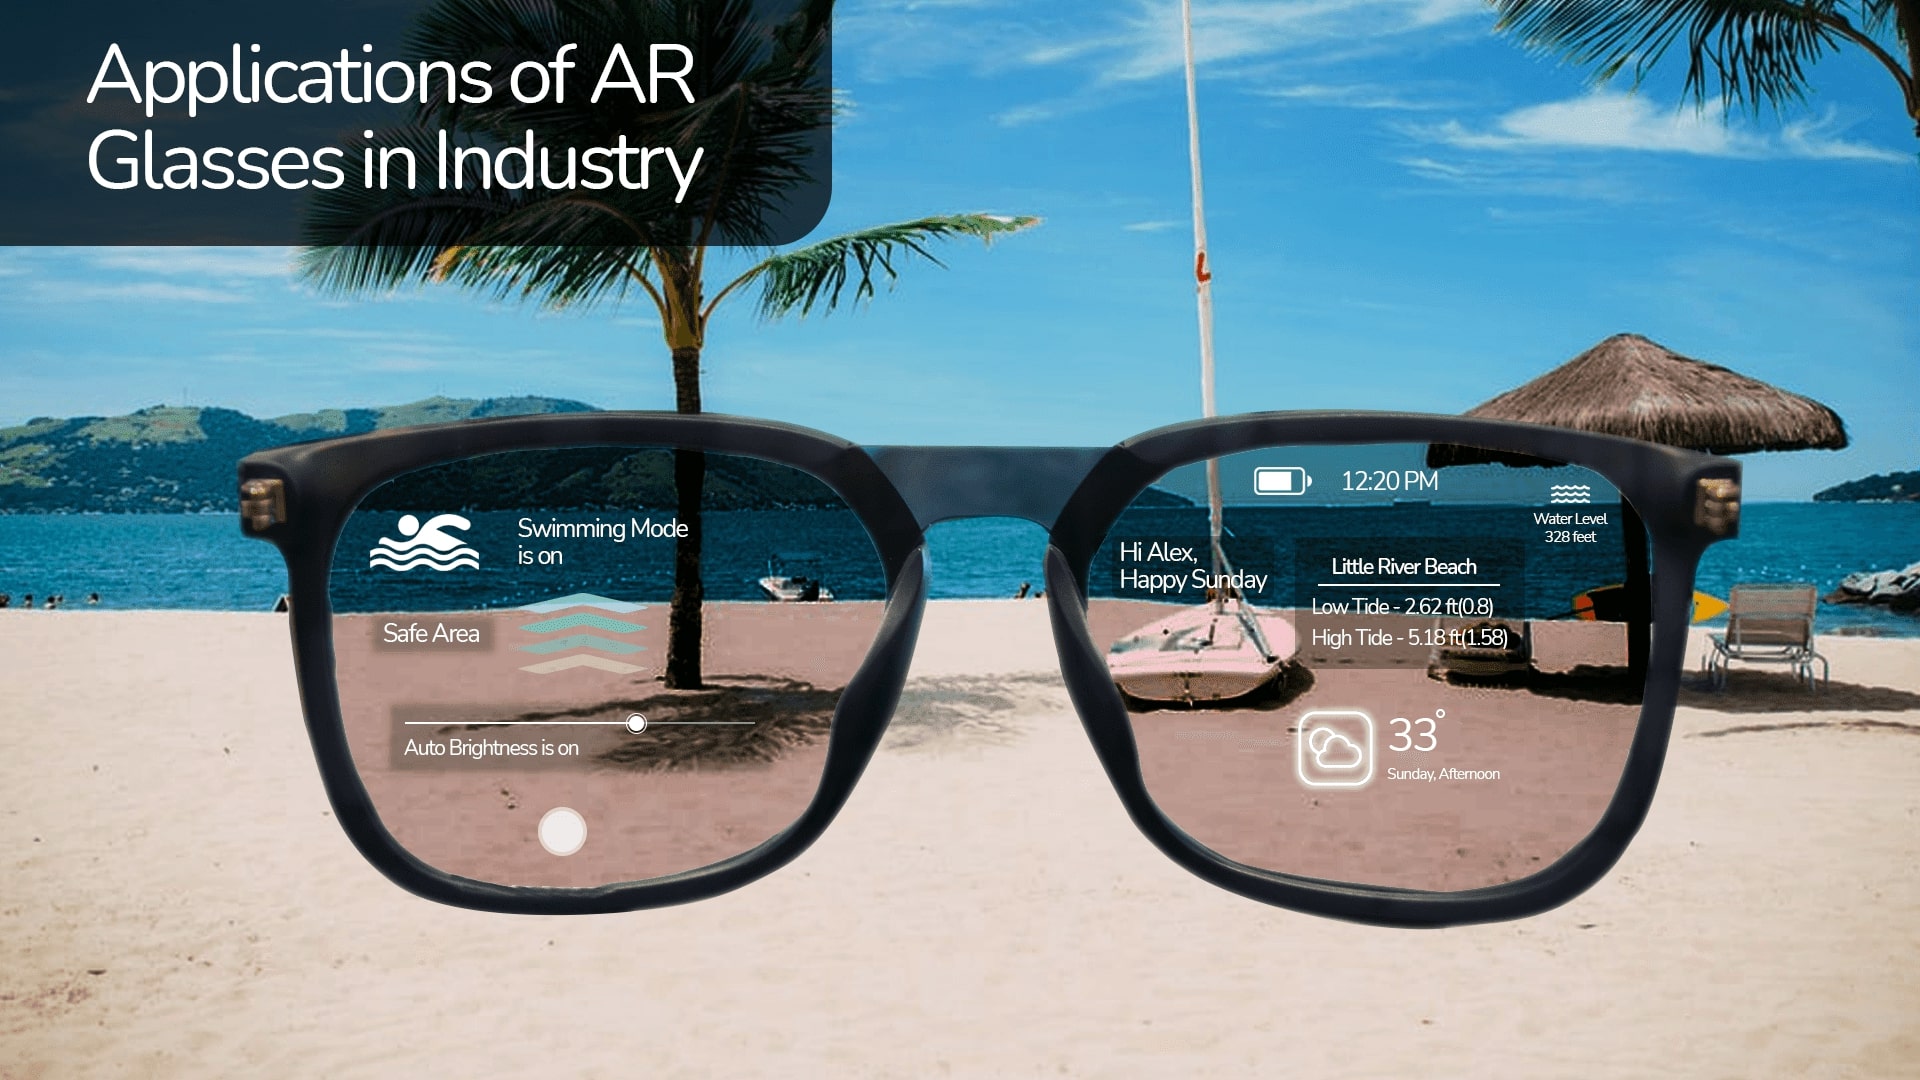 Applications of AR Glasses in Industry